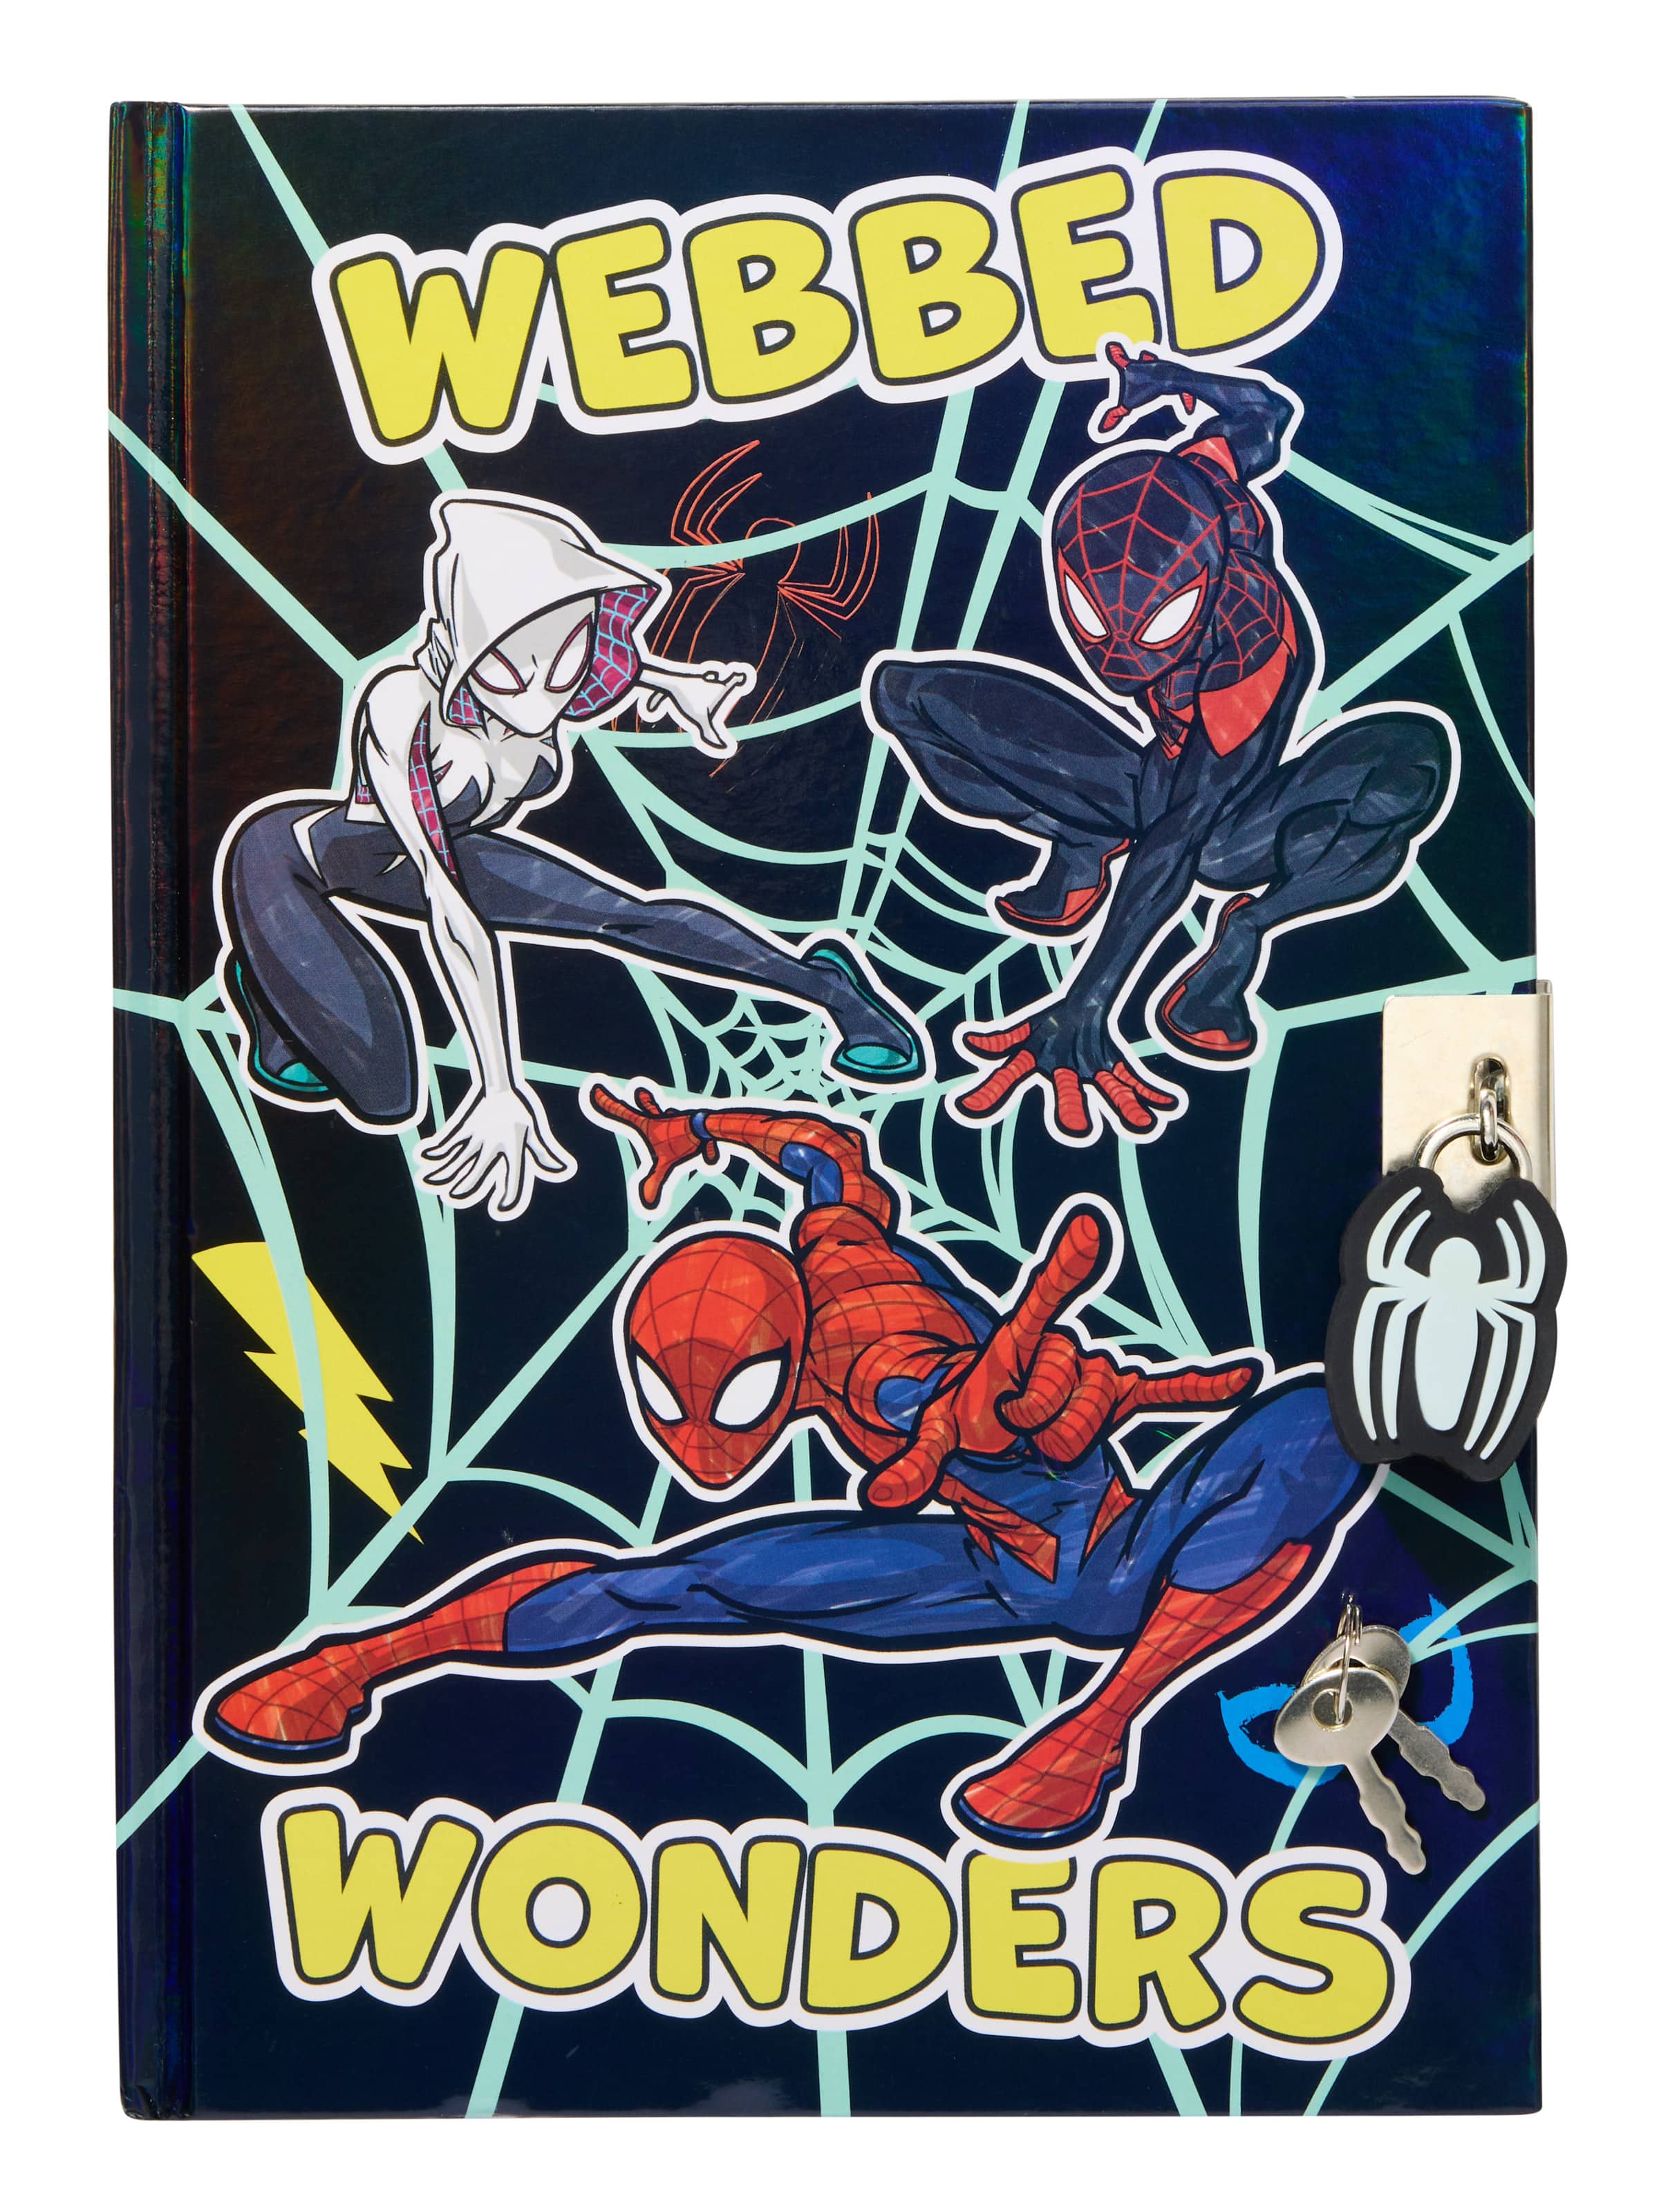 DIARY WITH MAGIC PEN SPIDERMAN – Kids Licensing